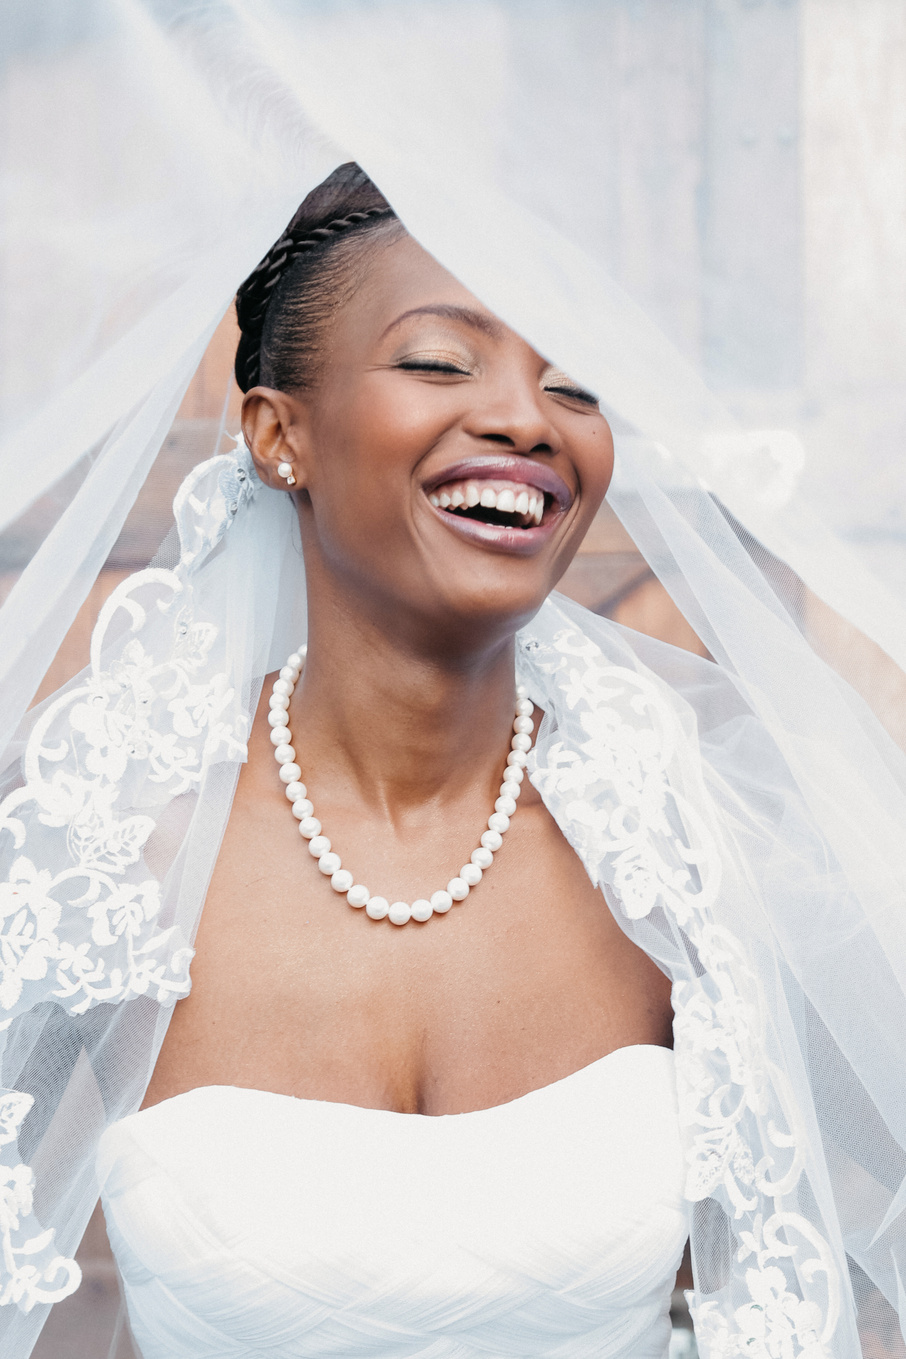 Smiling Bride on Her Wedding Day